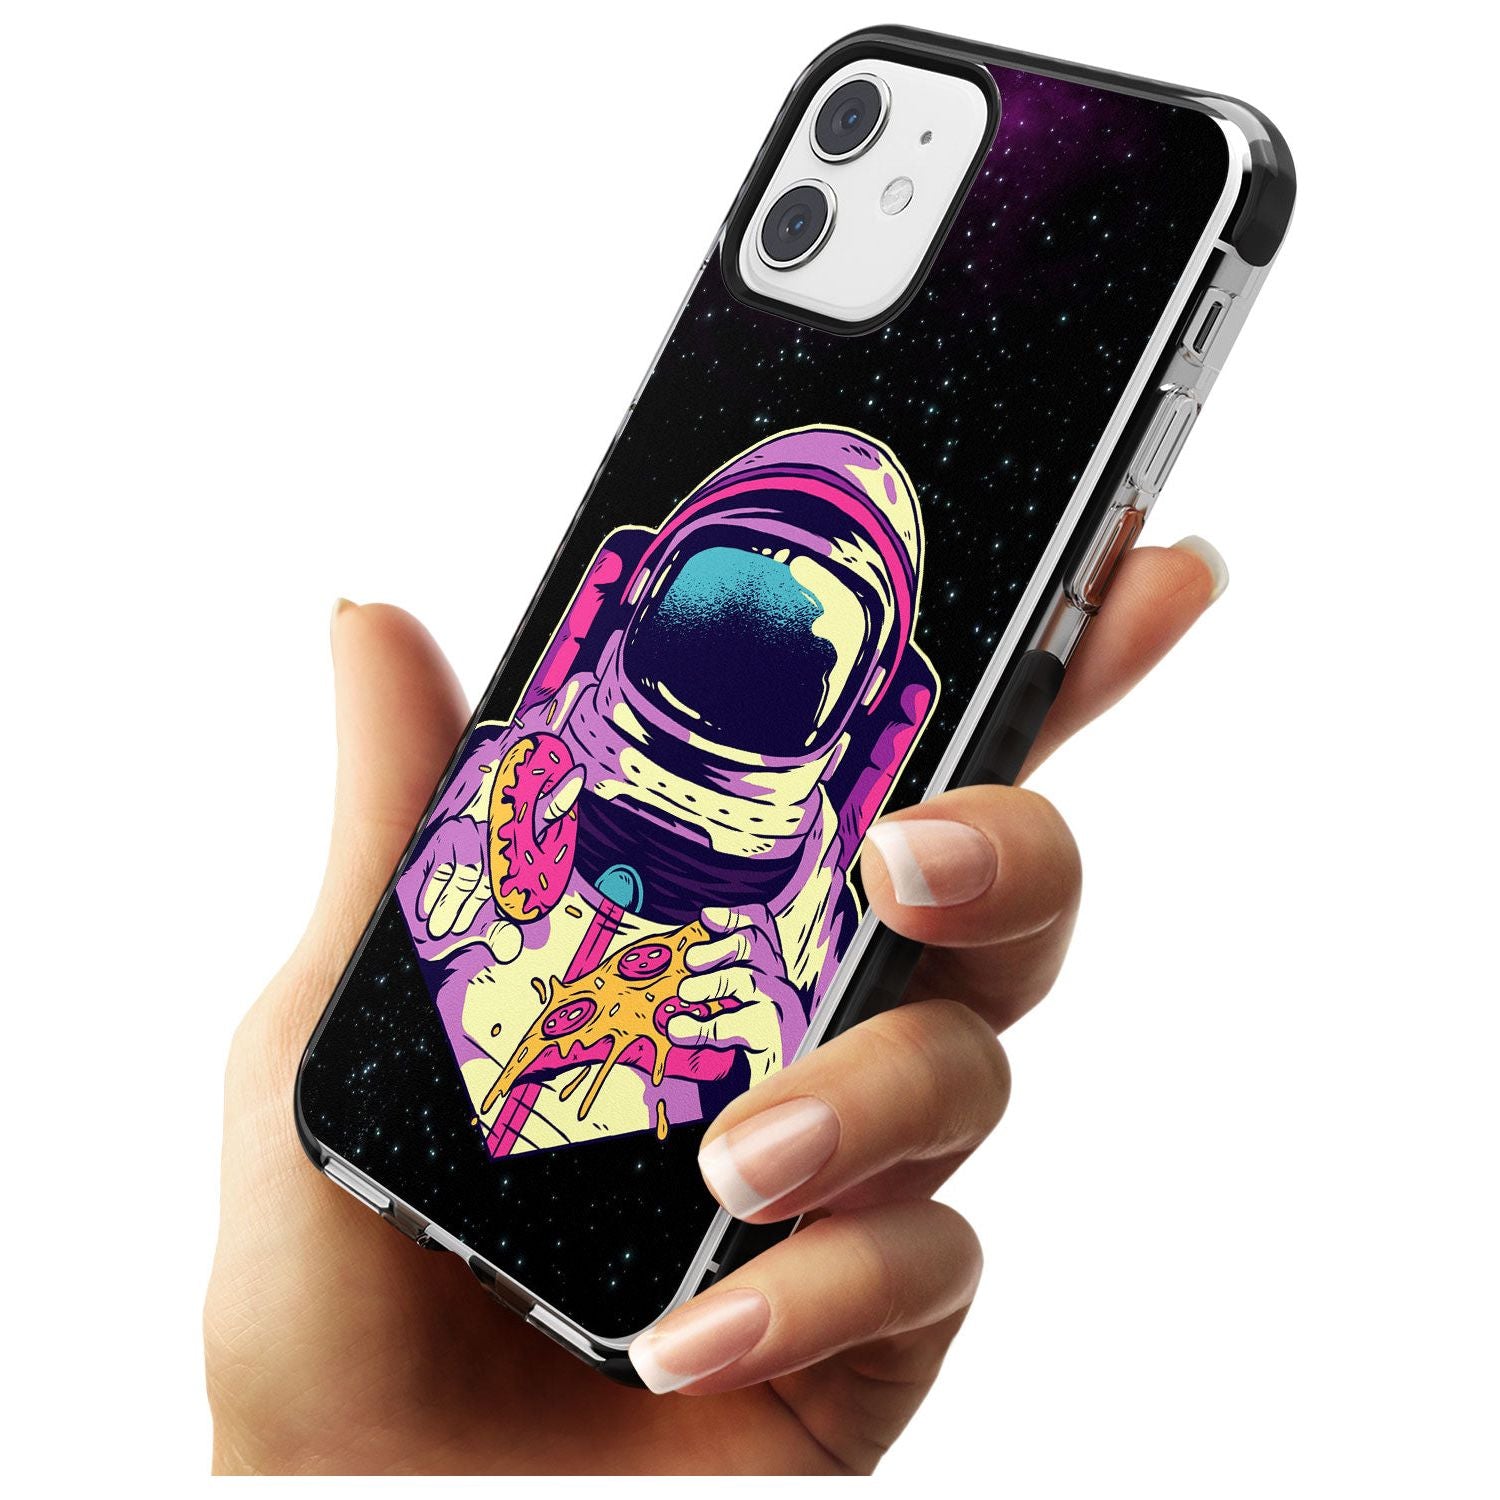 Astro Cheat Meal Black Impact Phone Case for iPhone 11 Pro Max